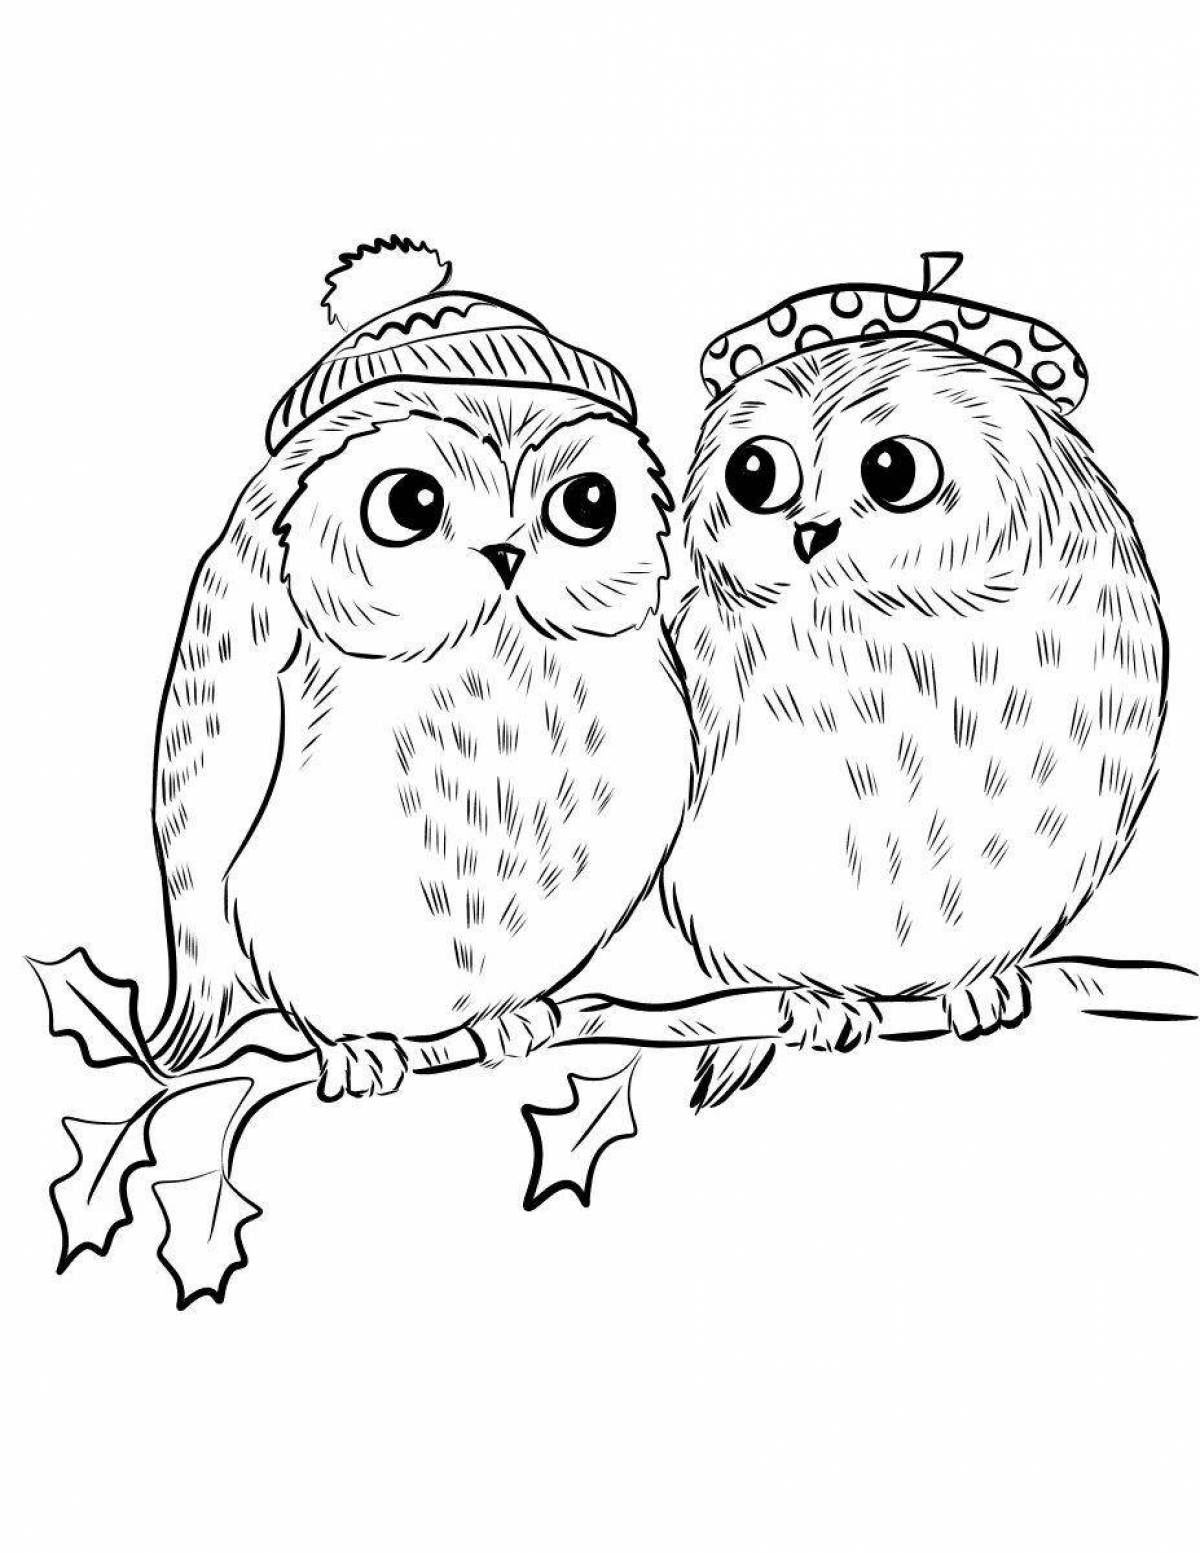 Serene owl coloring pages